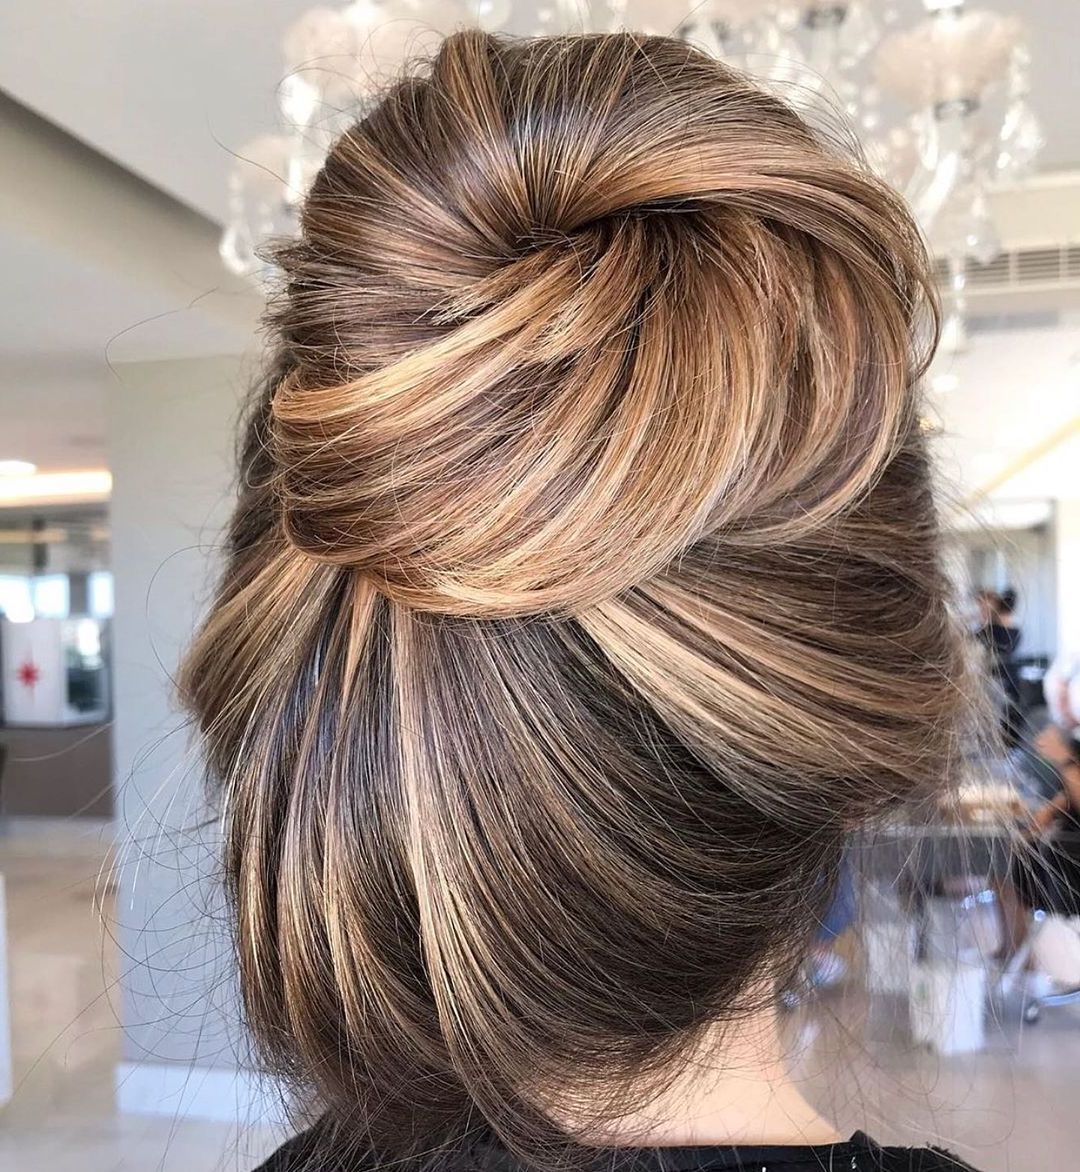 24 Messy Bun Hair Ideas That You Need To Try Out Inside Most Recent Messy Chignon With Highlights (Gallery 6 of 15)